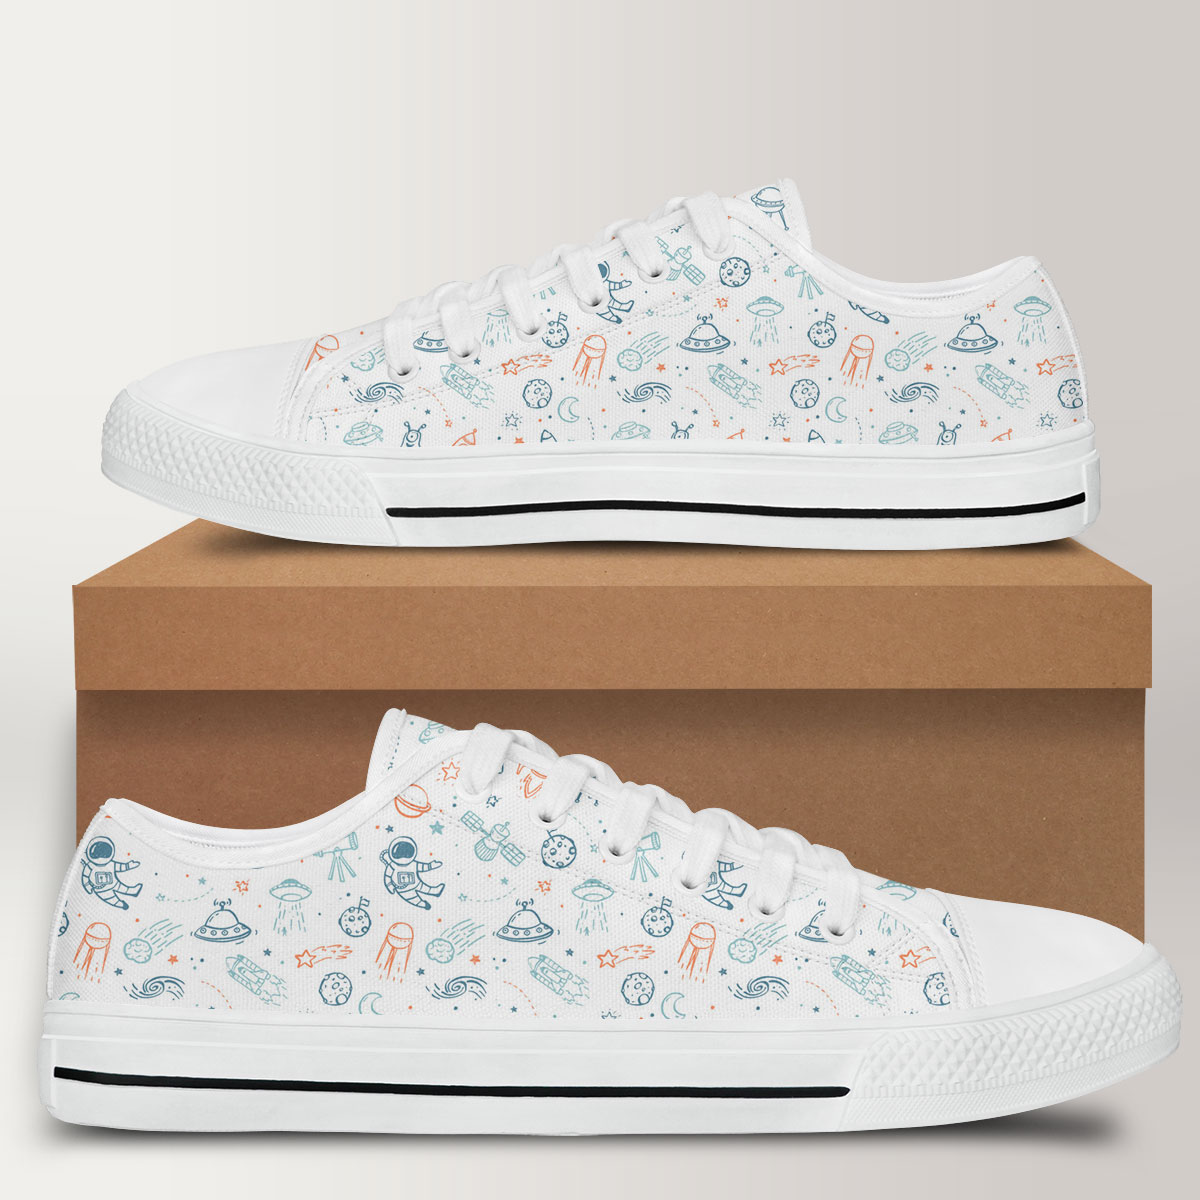 Astronaut Patterns Illustrations Low Top Shoes